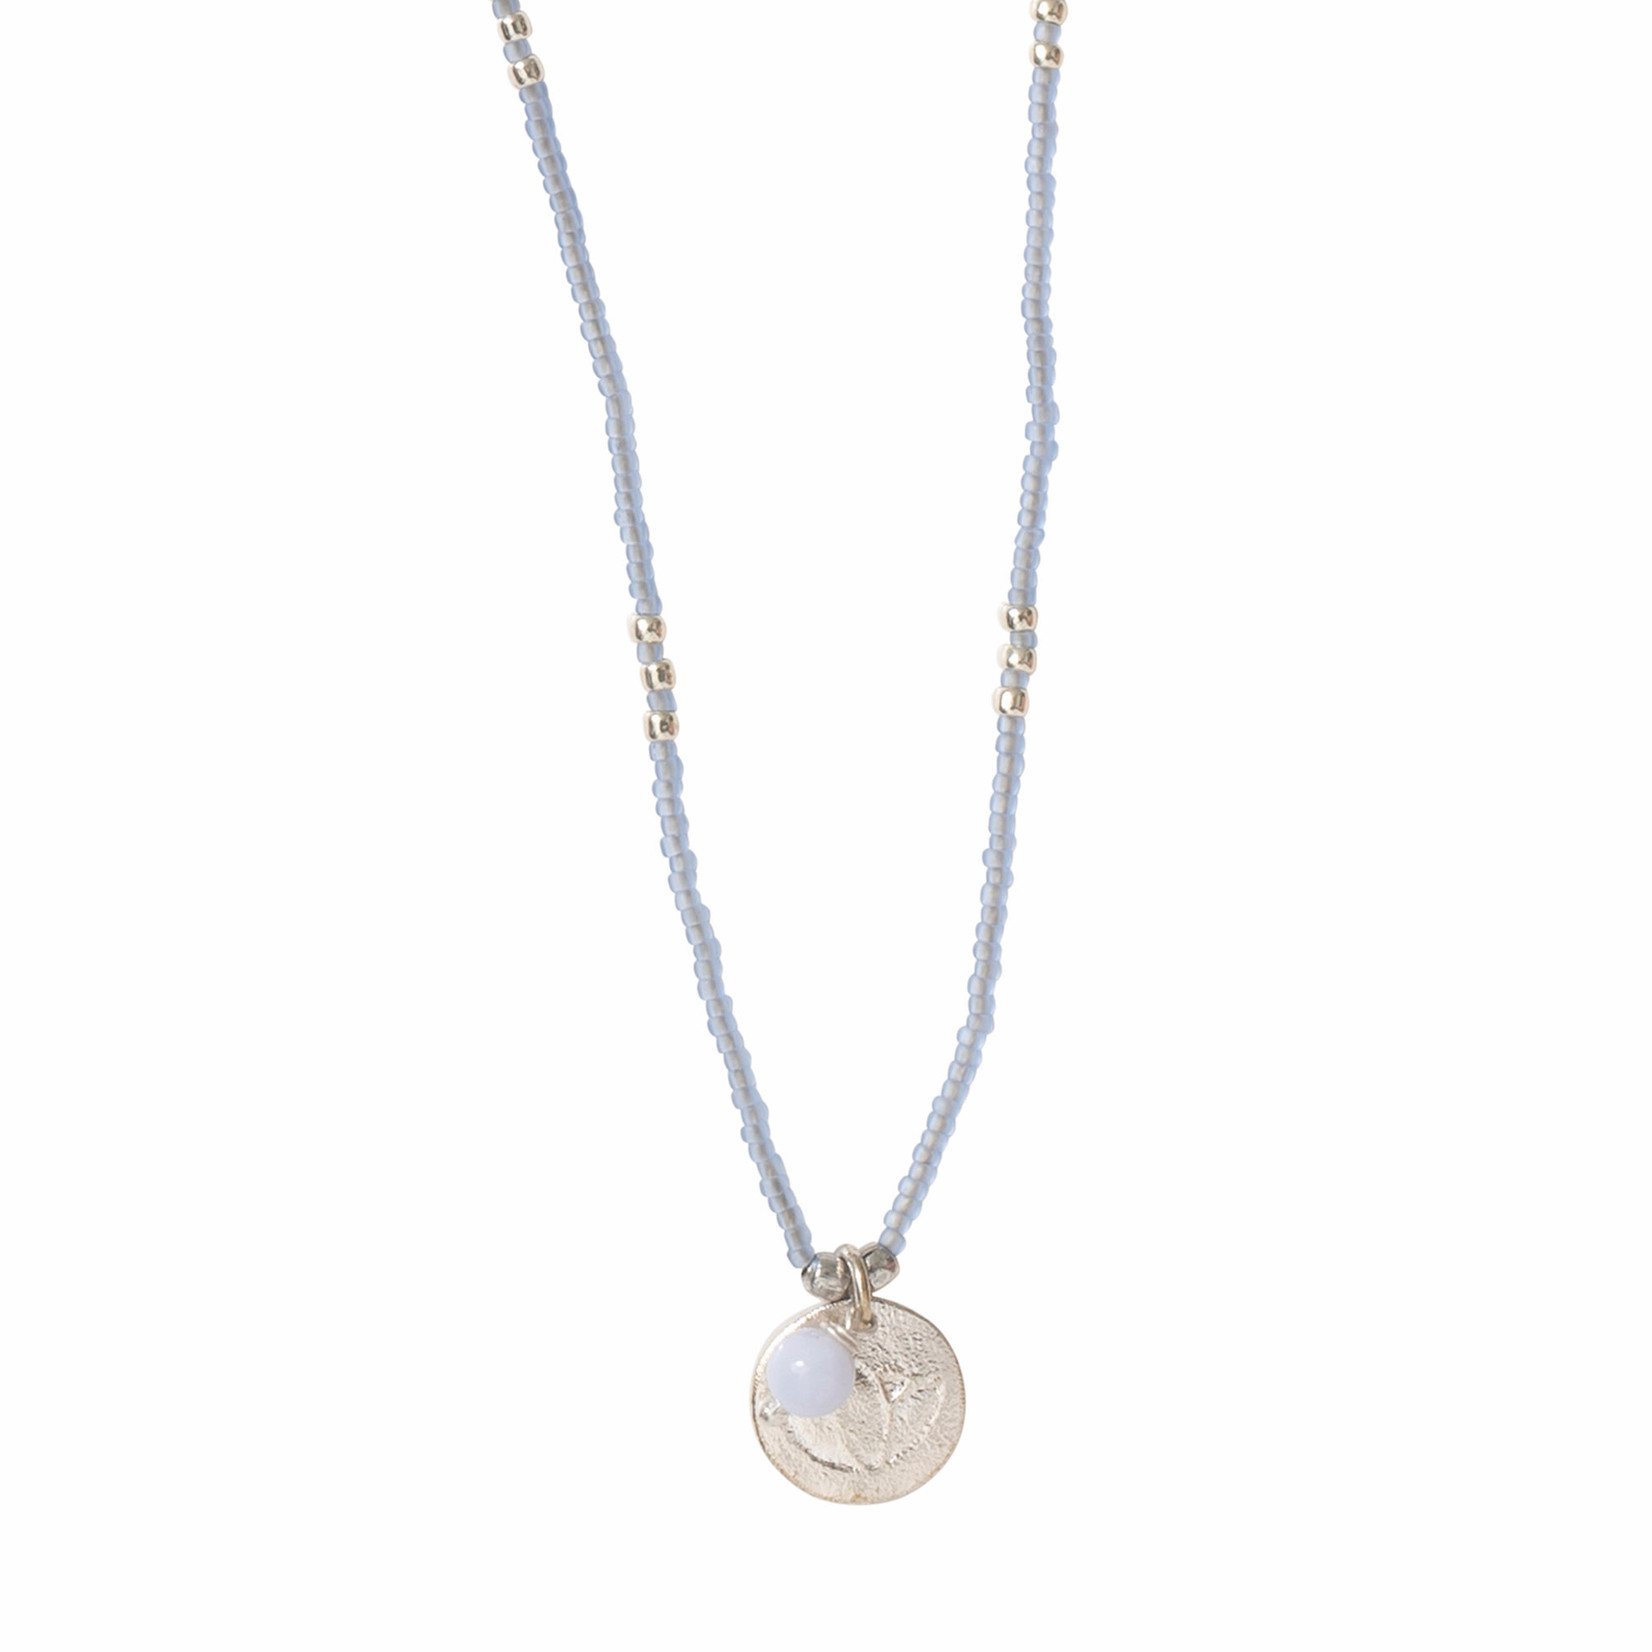 A Beautiful Story Timeless Blue Lace Agate Silver Necklace